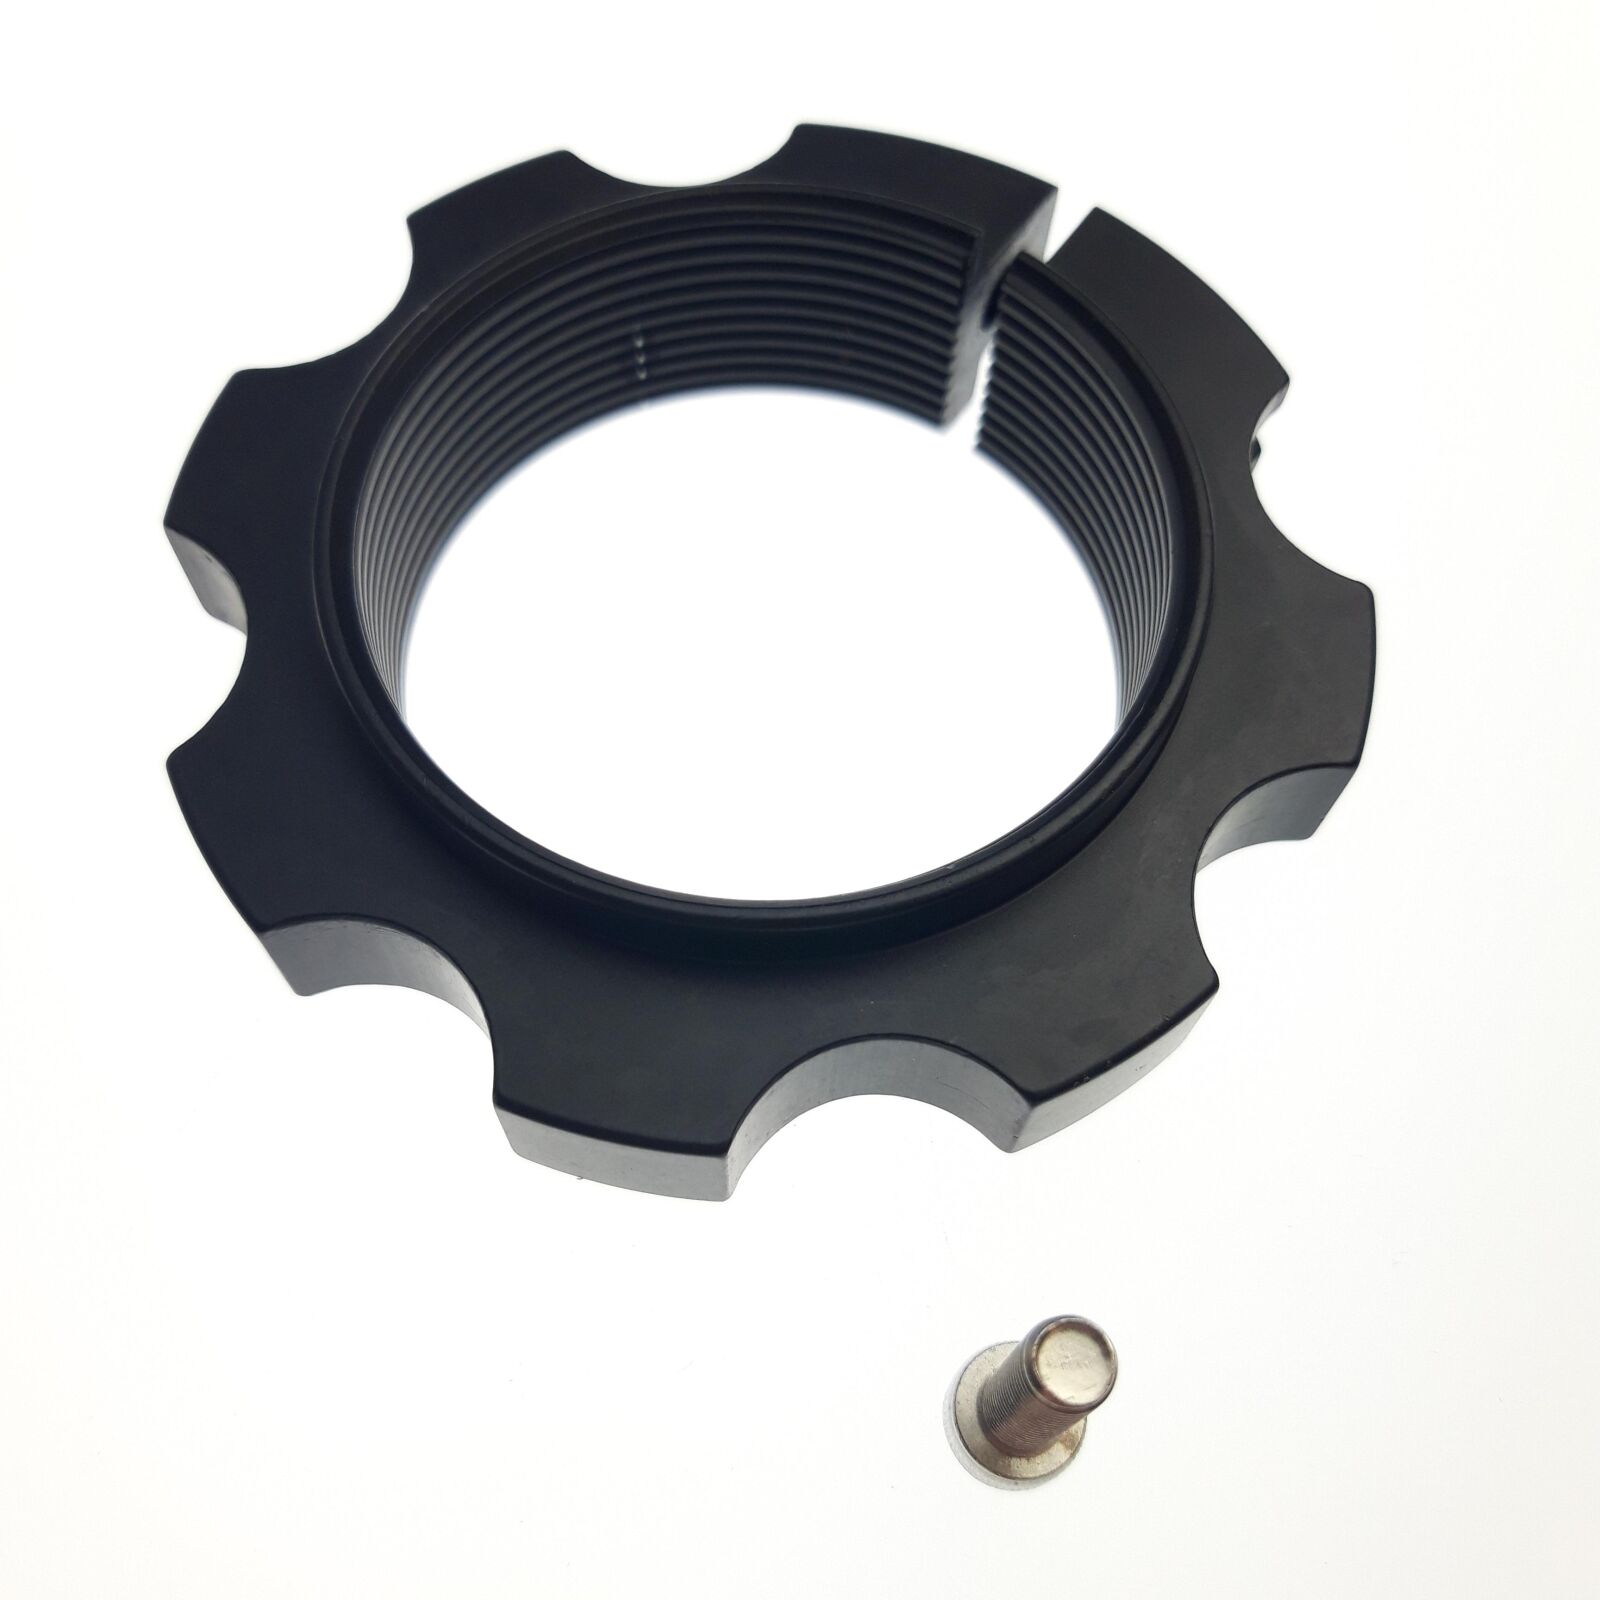 Spring Hardware Assembly: Preload Ring [2.25 ID and 2.50IDSpring]Clamp Design,Al6061,